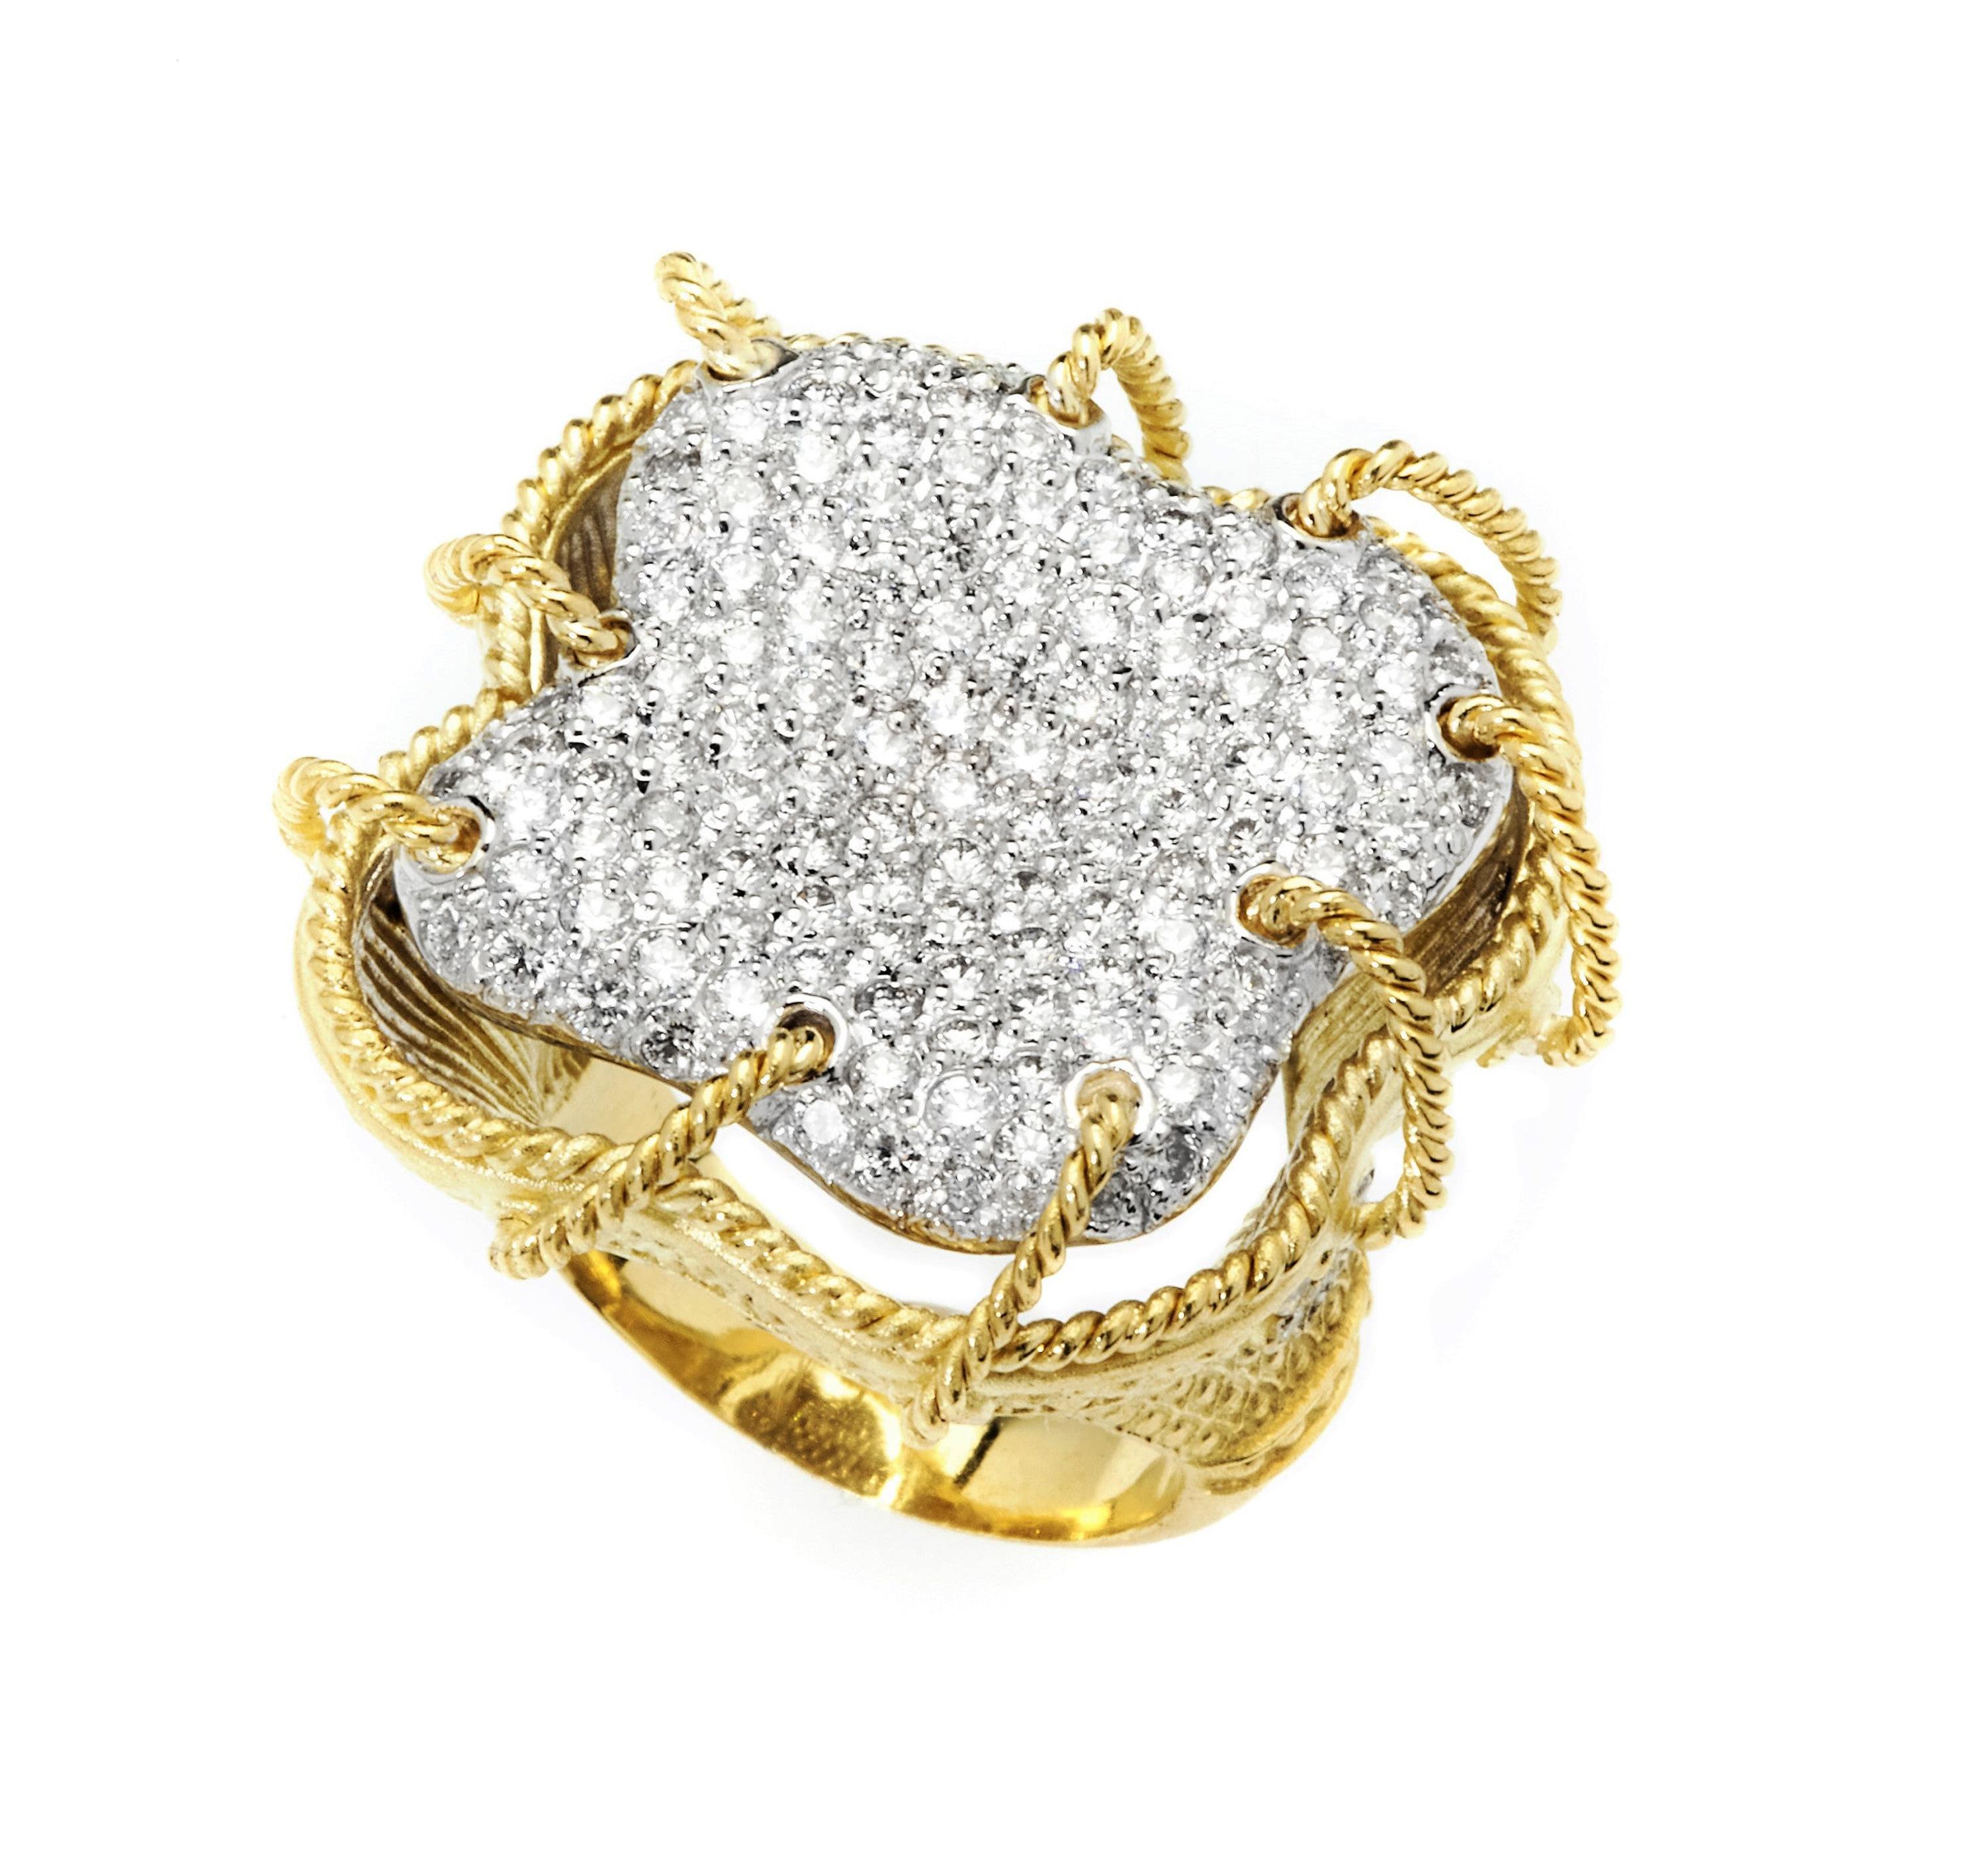 Contemporary Stambolian 18 Karat Yellow White Gold Pavé Set Diamonds Large Dome Cocktail Ring For Sale